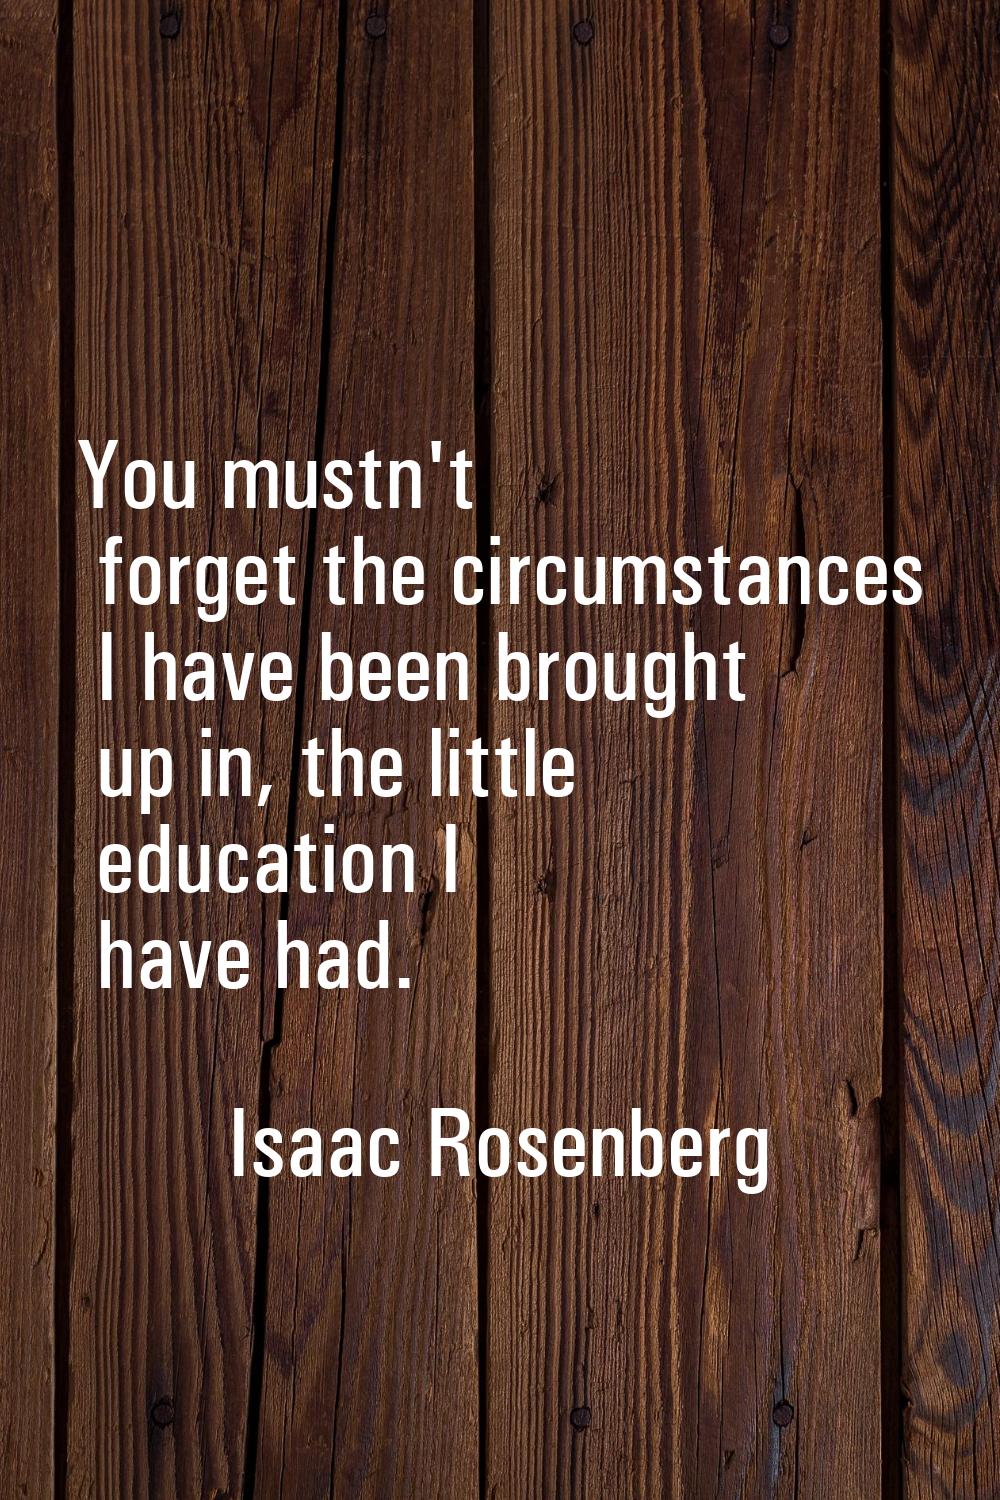 You mustn't forget the circumstances I have been brought up in, the little education I have had.